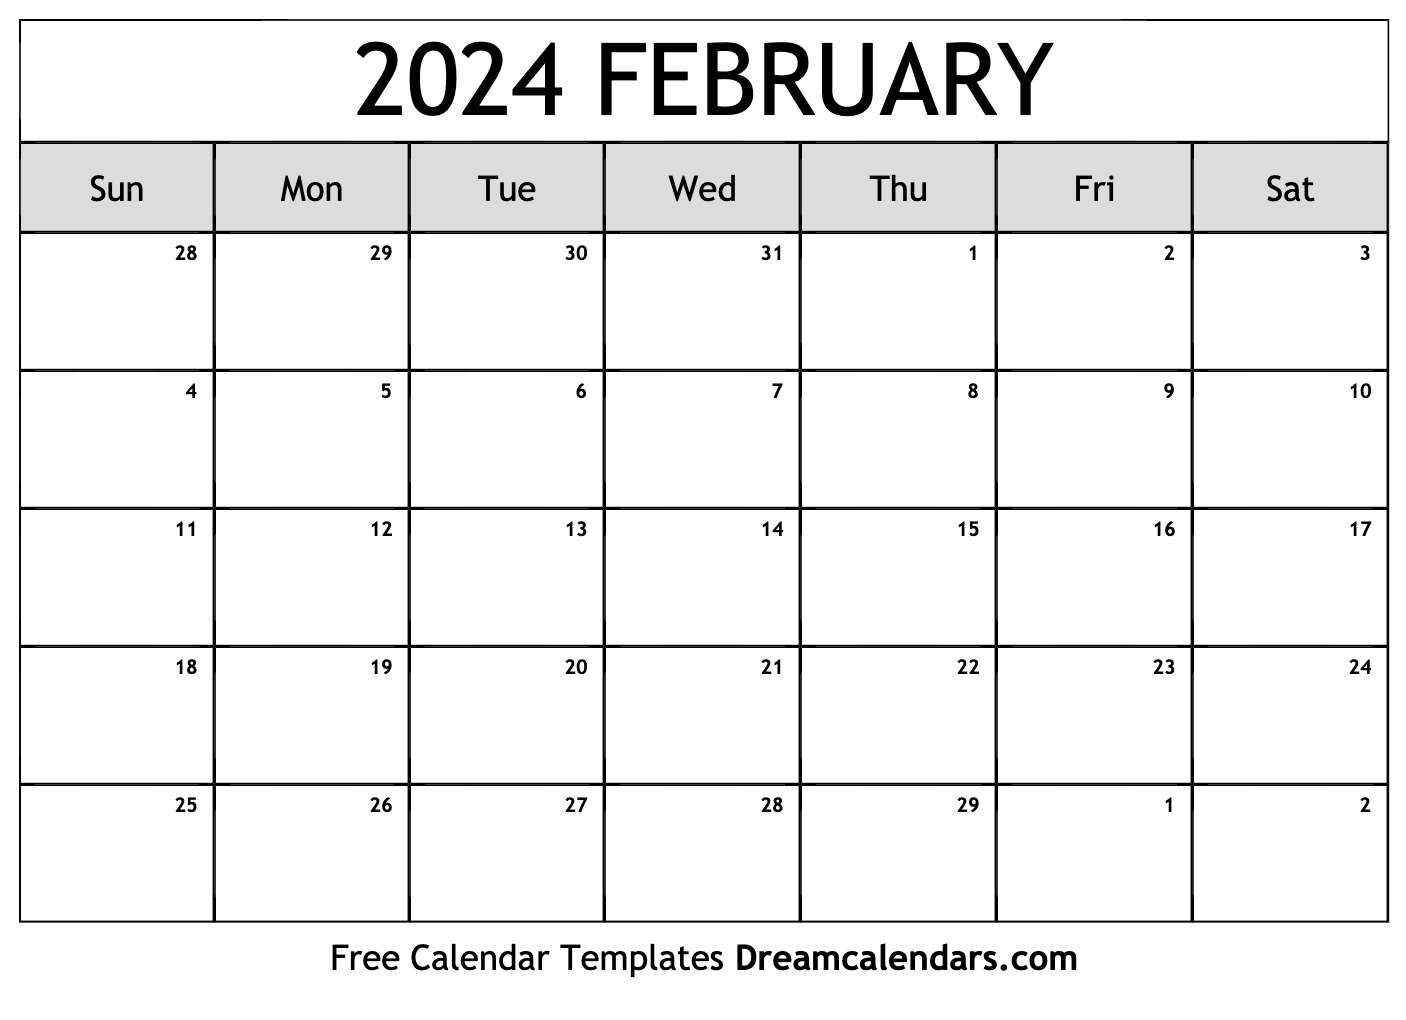 February 2024 Calendar Free Printable with Holidays and Observances